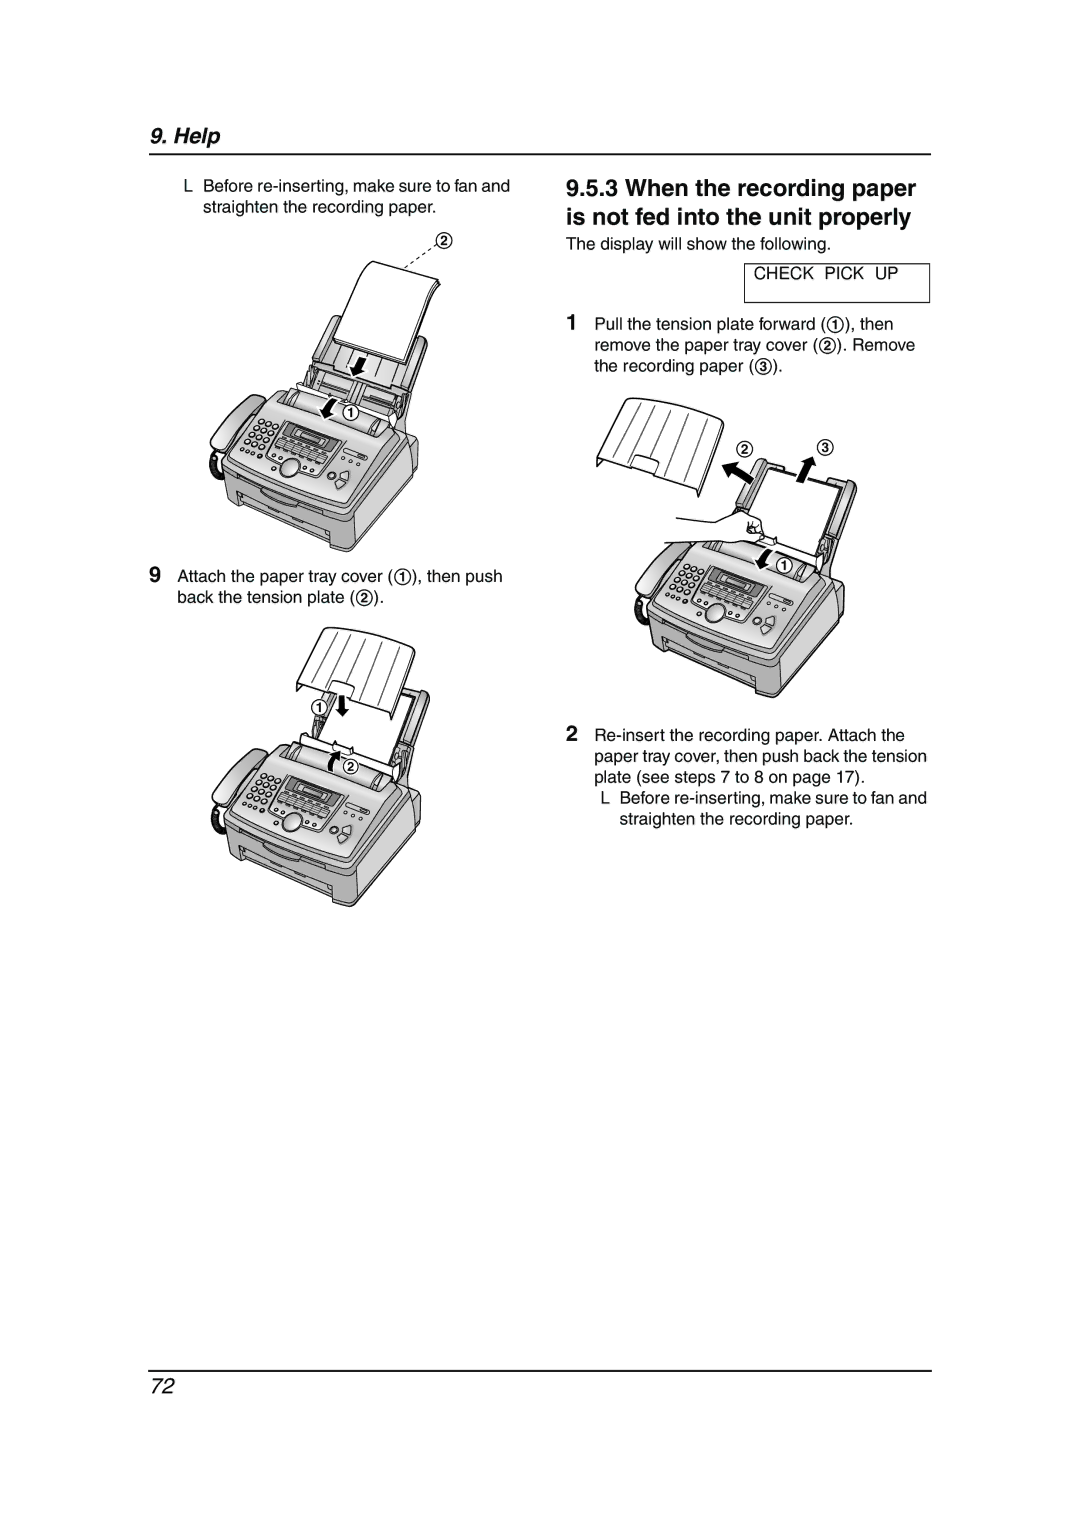 Panasonic KX-FLM653HK manual When the recording paper is not fed into the unit properly, Check Pick UP 